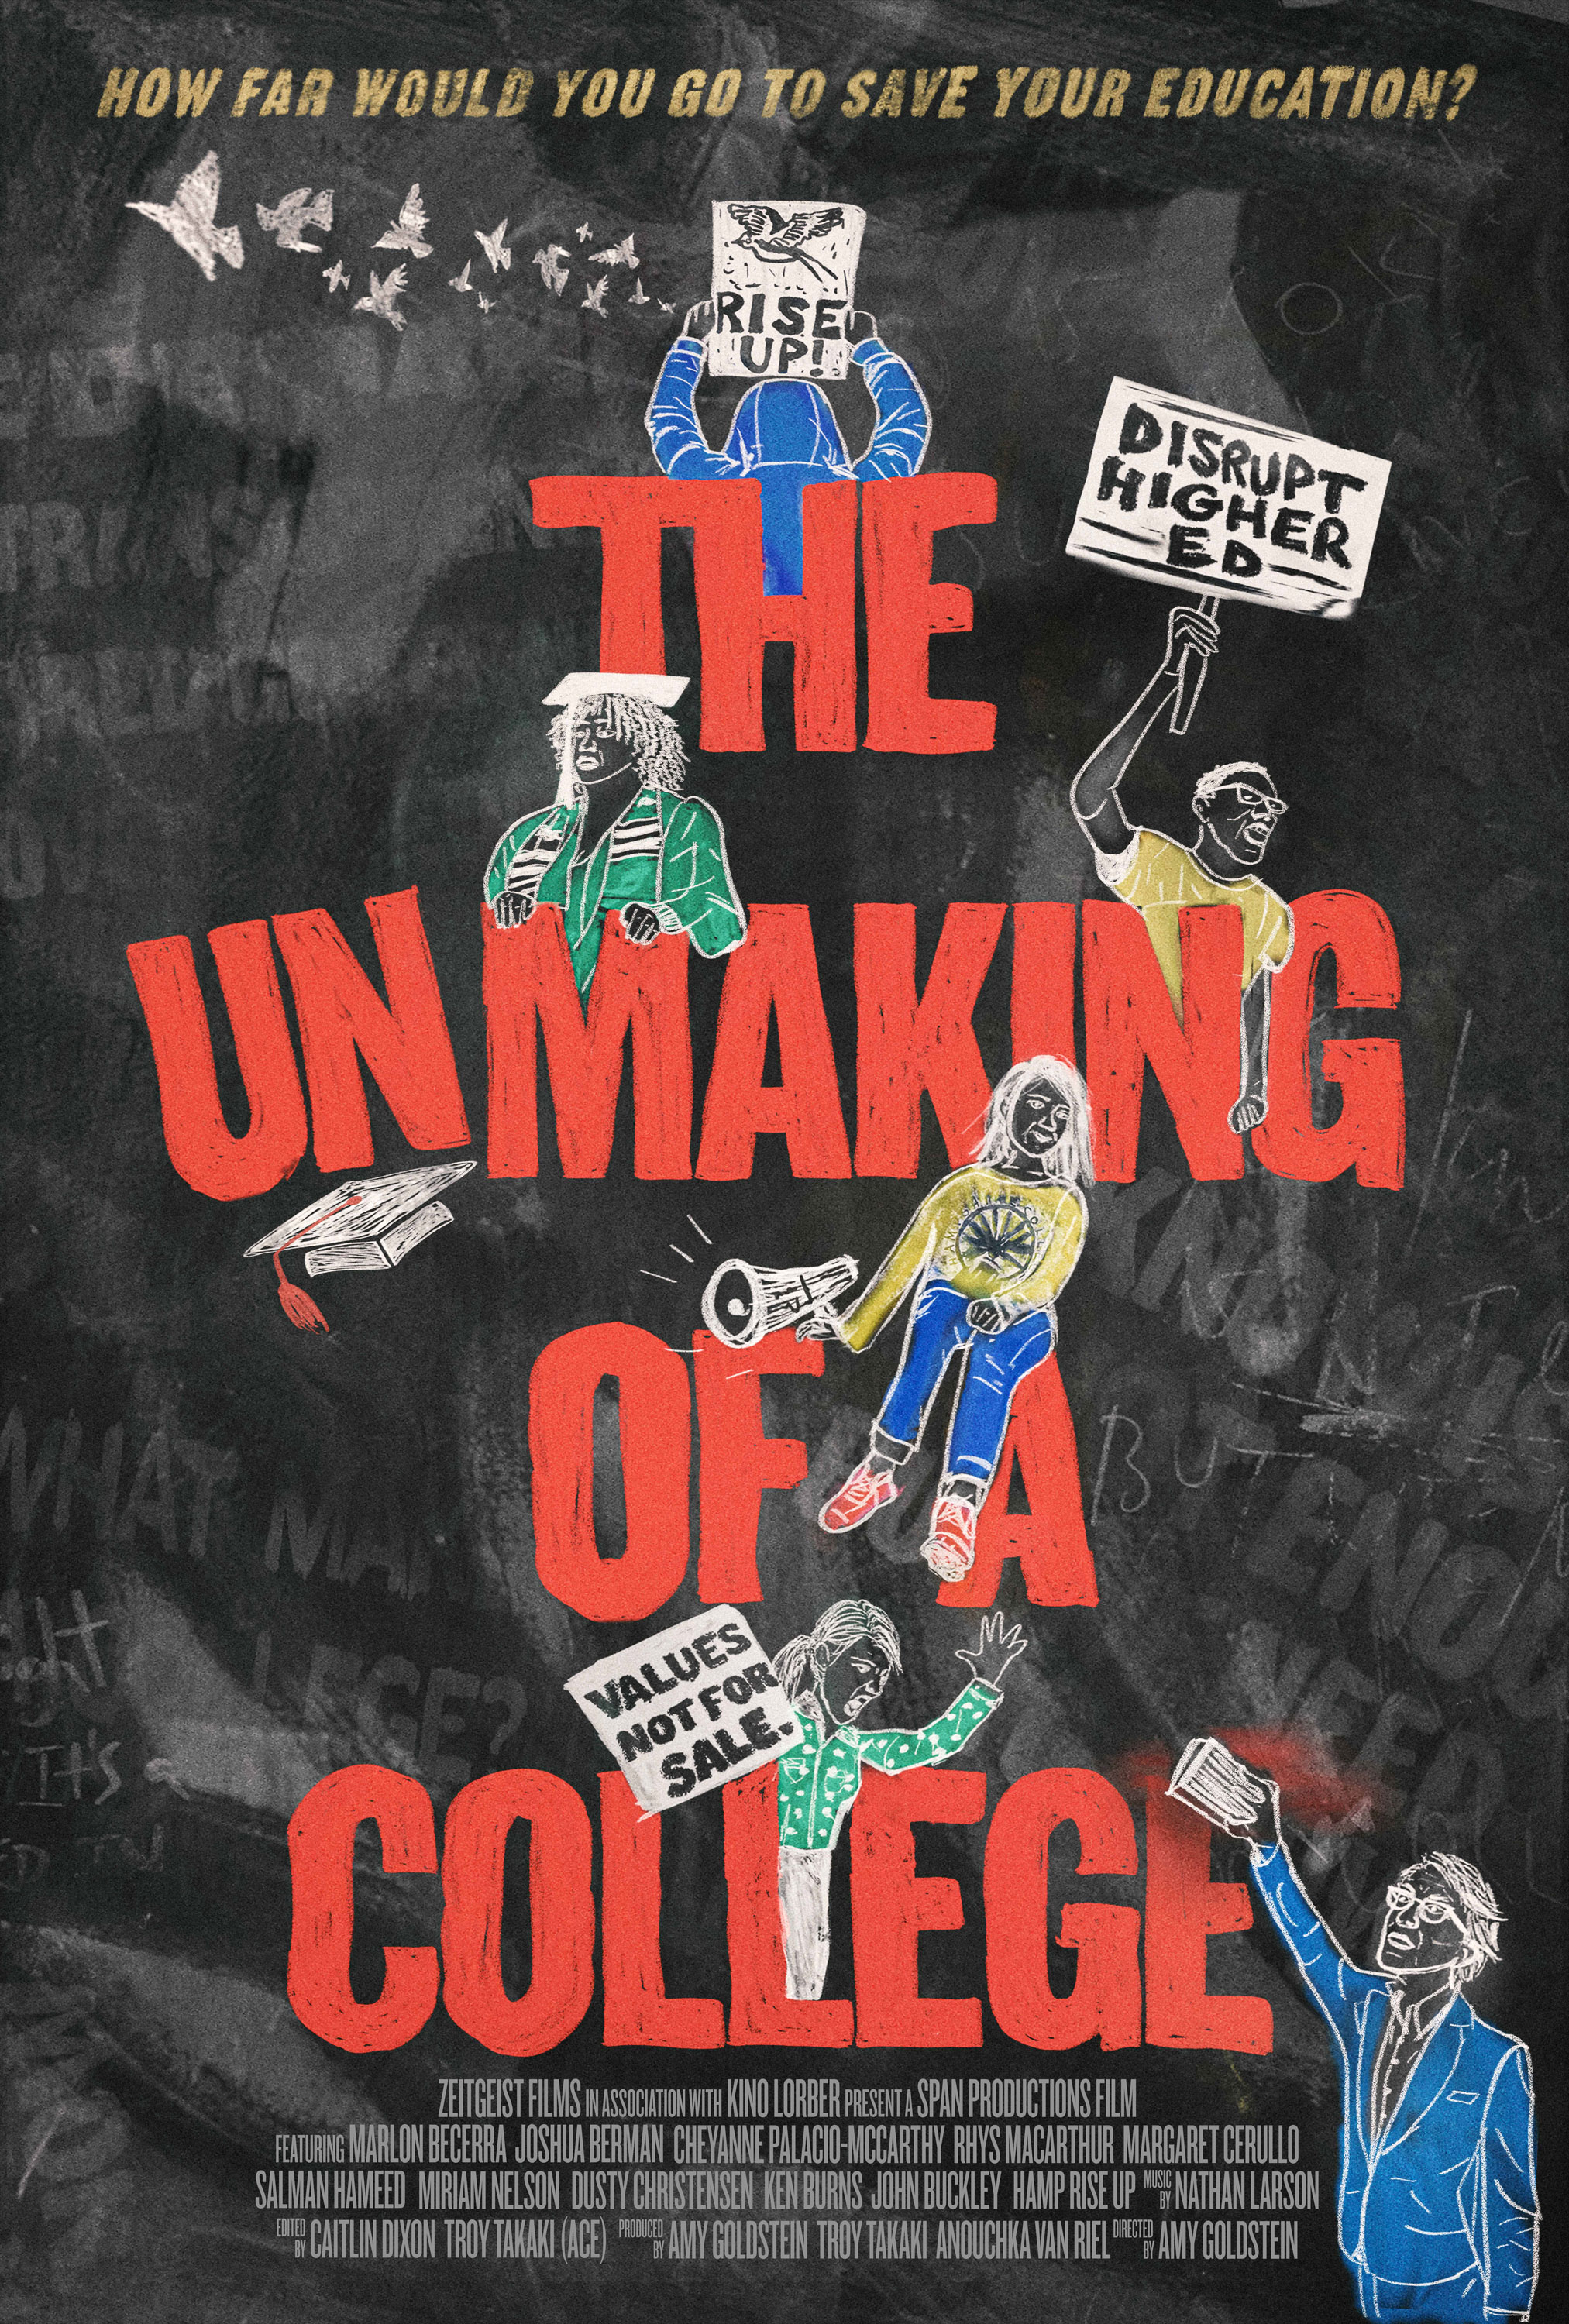 The Unmaking of a College [DVD]